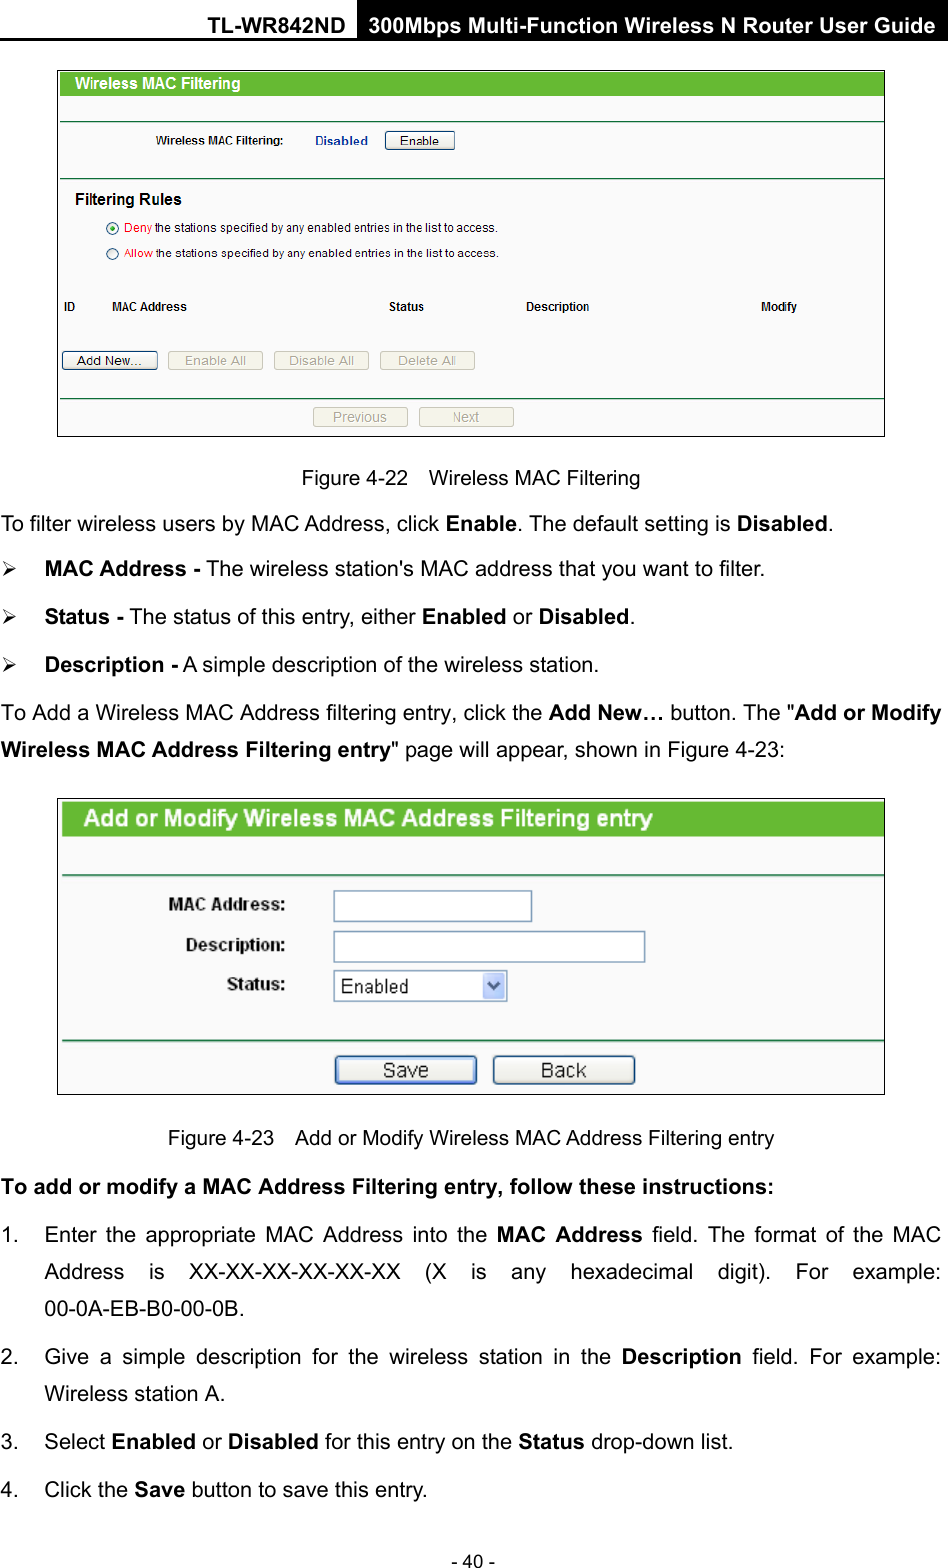 TL-WR842ND 300Mbps Multi-Function Wireless N Router User Guide  - 40 -  Figure 4-22  Wireless MAC Filtering To filter wireless users by MAC Address, click Enable. The default setting is Disabled.  MAC Address - The wireless station&apos;s MAC address that you want to filter.    Status - The status of this entry, either Enabled or Disabled.  Description - A simple description of the wireless station.   To Add a Wireless MAC Address filtering entry, click the Add New… button. The &quot;Add or Modify Wireless MAC Address Filtering entry&quot; page will appear, shown in Figure 4-23:  Figure 4-23  Add or Modify Wireless MAC Address Filtering entry To add or modify a MAC Address Filtering entry, follow these instructions: 1. Enter the appropriate MAC Address into the MAC Address field. The format of the MAC Address is XX-XX-XX-XX-XX-XX (X is any hexadecimal digit). For example: 00-0A-EB-B0-00-0B.   2. Give a simple description for the  wireless station in the Description field. For example: Wireless station A. 3. Select Enabled or Disabled for this entry on the Status drop-down list. 4. Click the Save button to save this entry. 